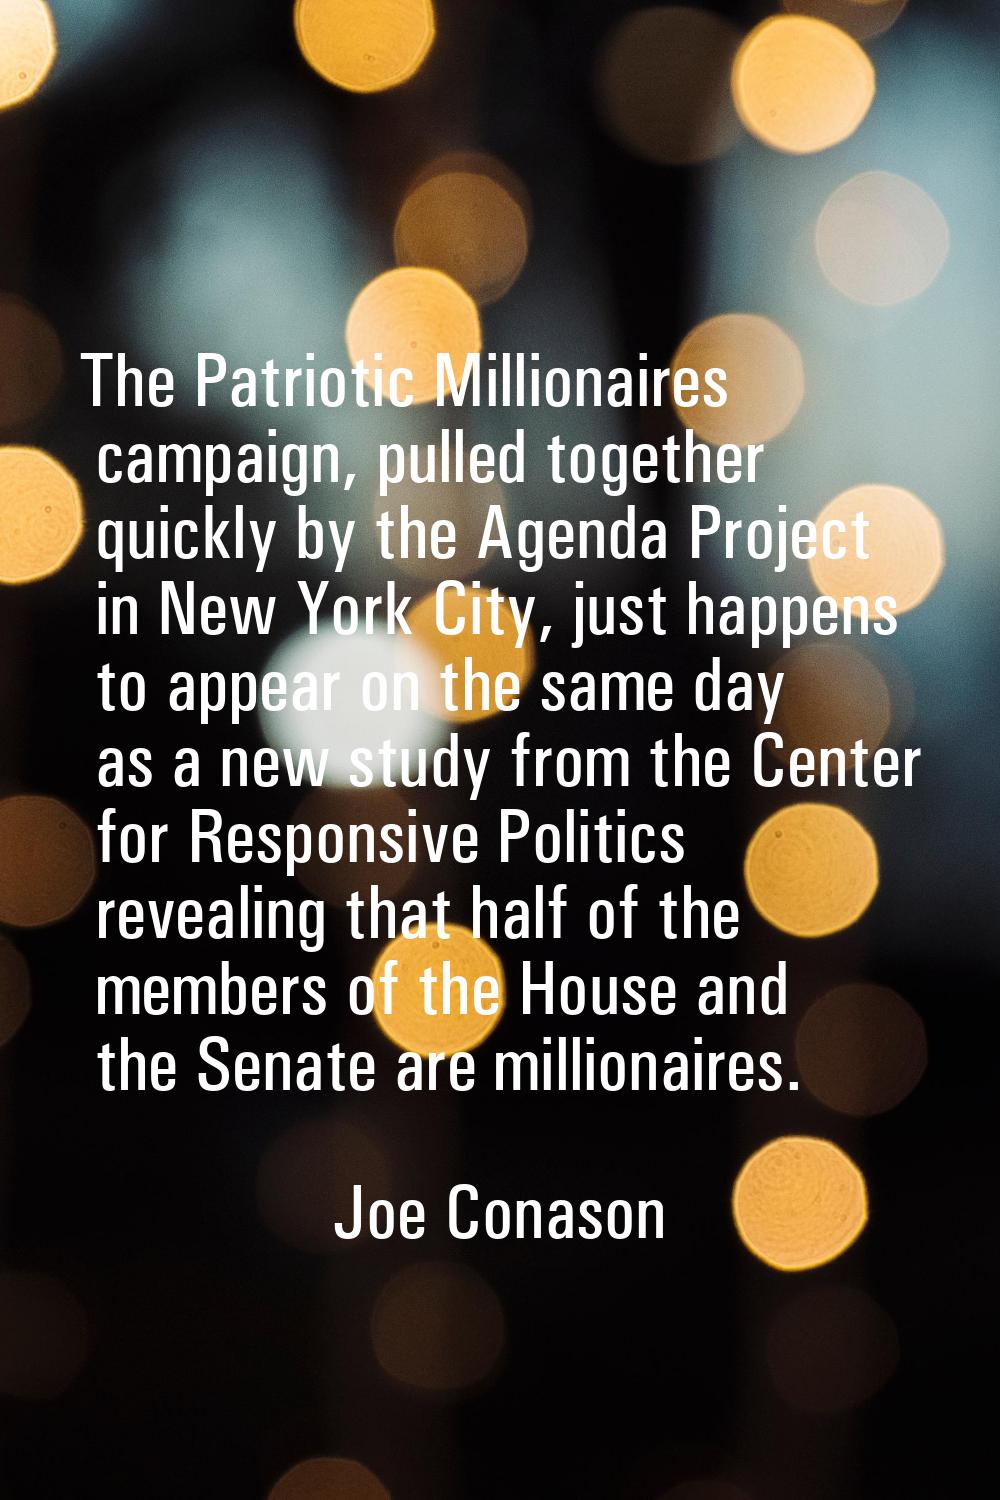 The Patriotic Millionaires campaign, pulled together quickly by the Agenda Project in New York City